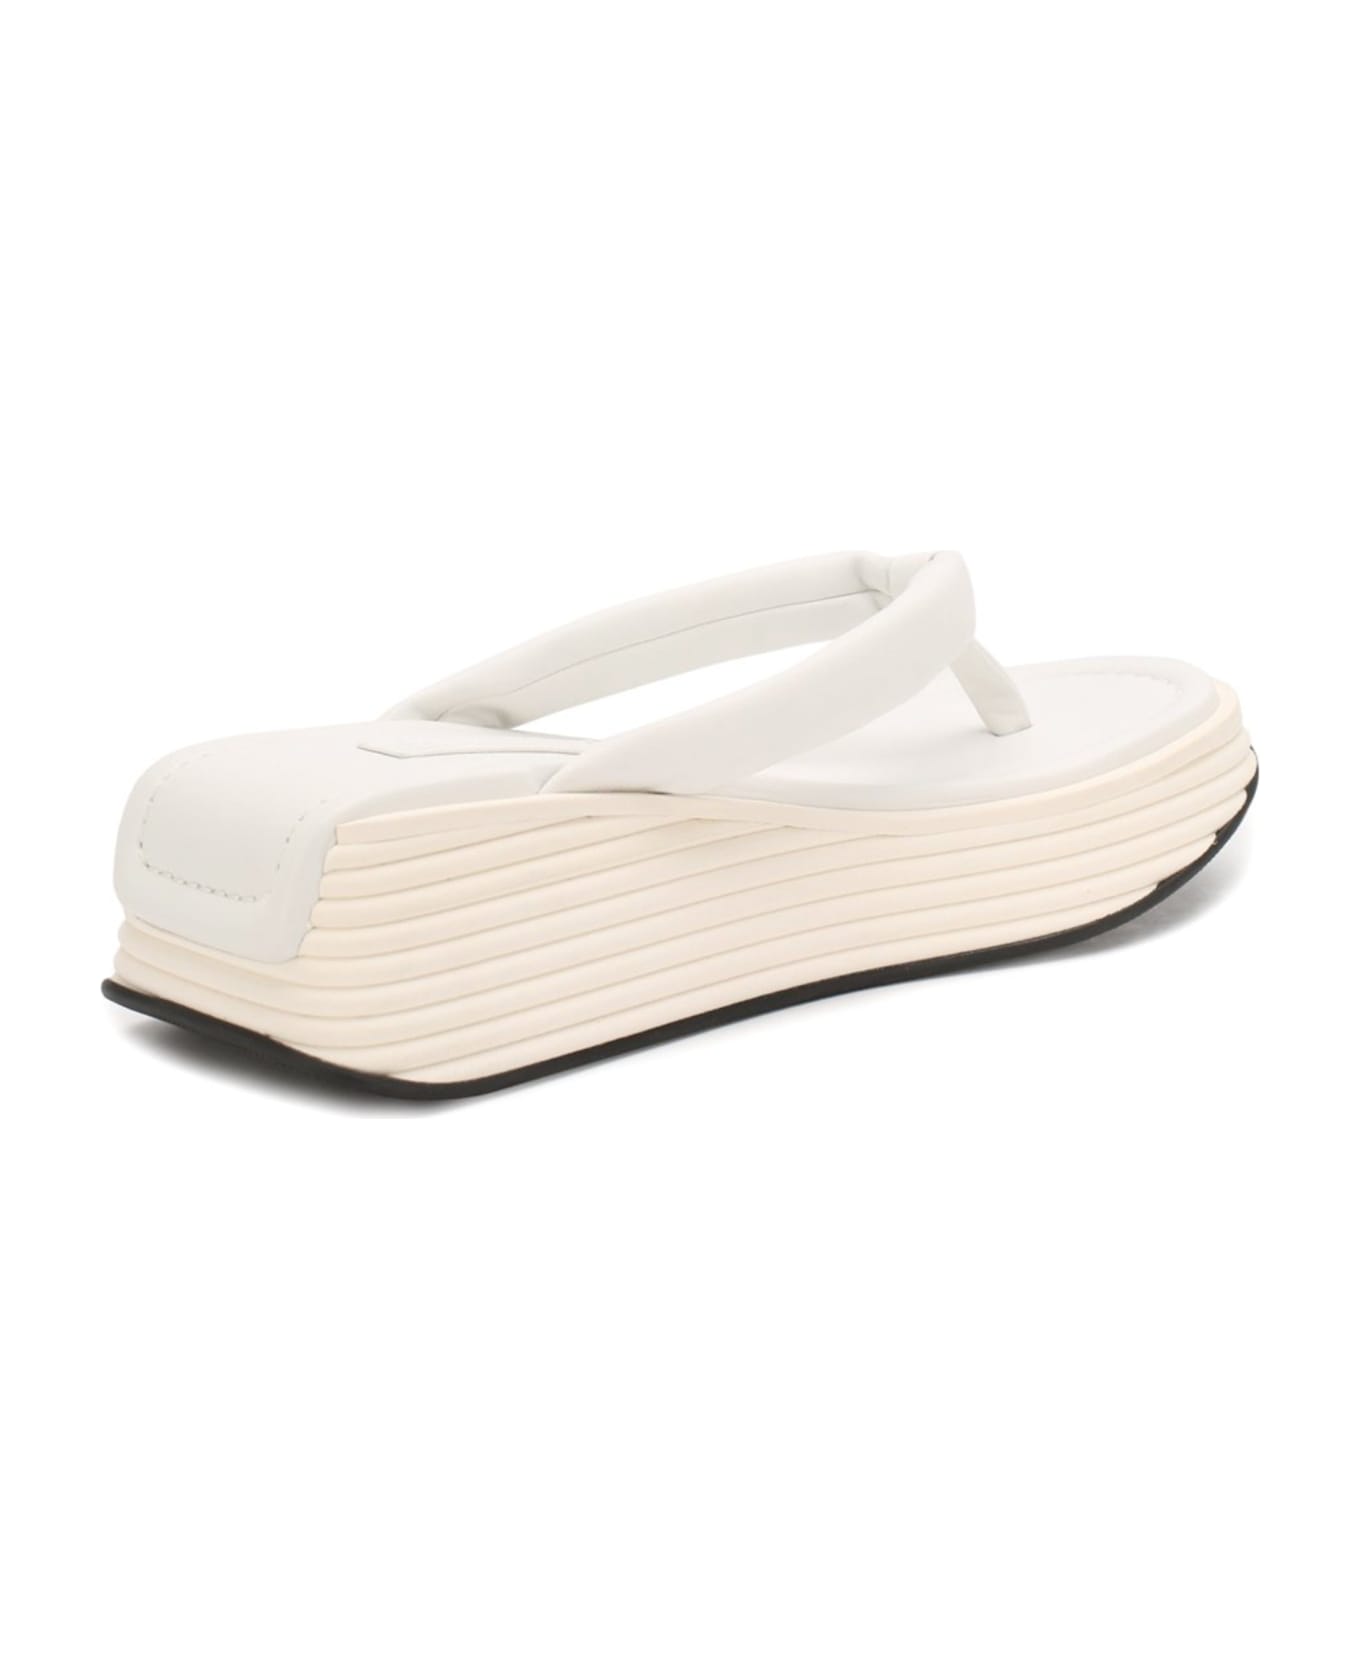 Givenchy Kyoto Sandals - White